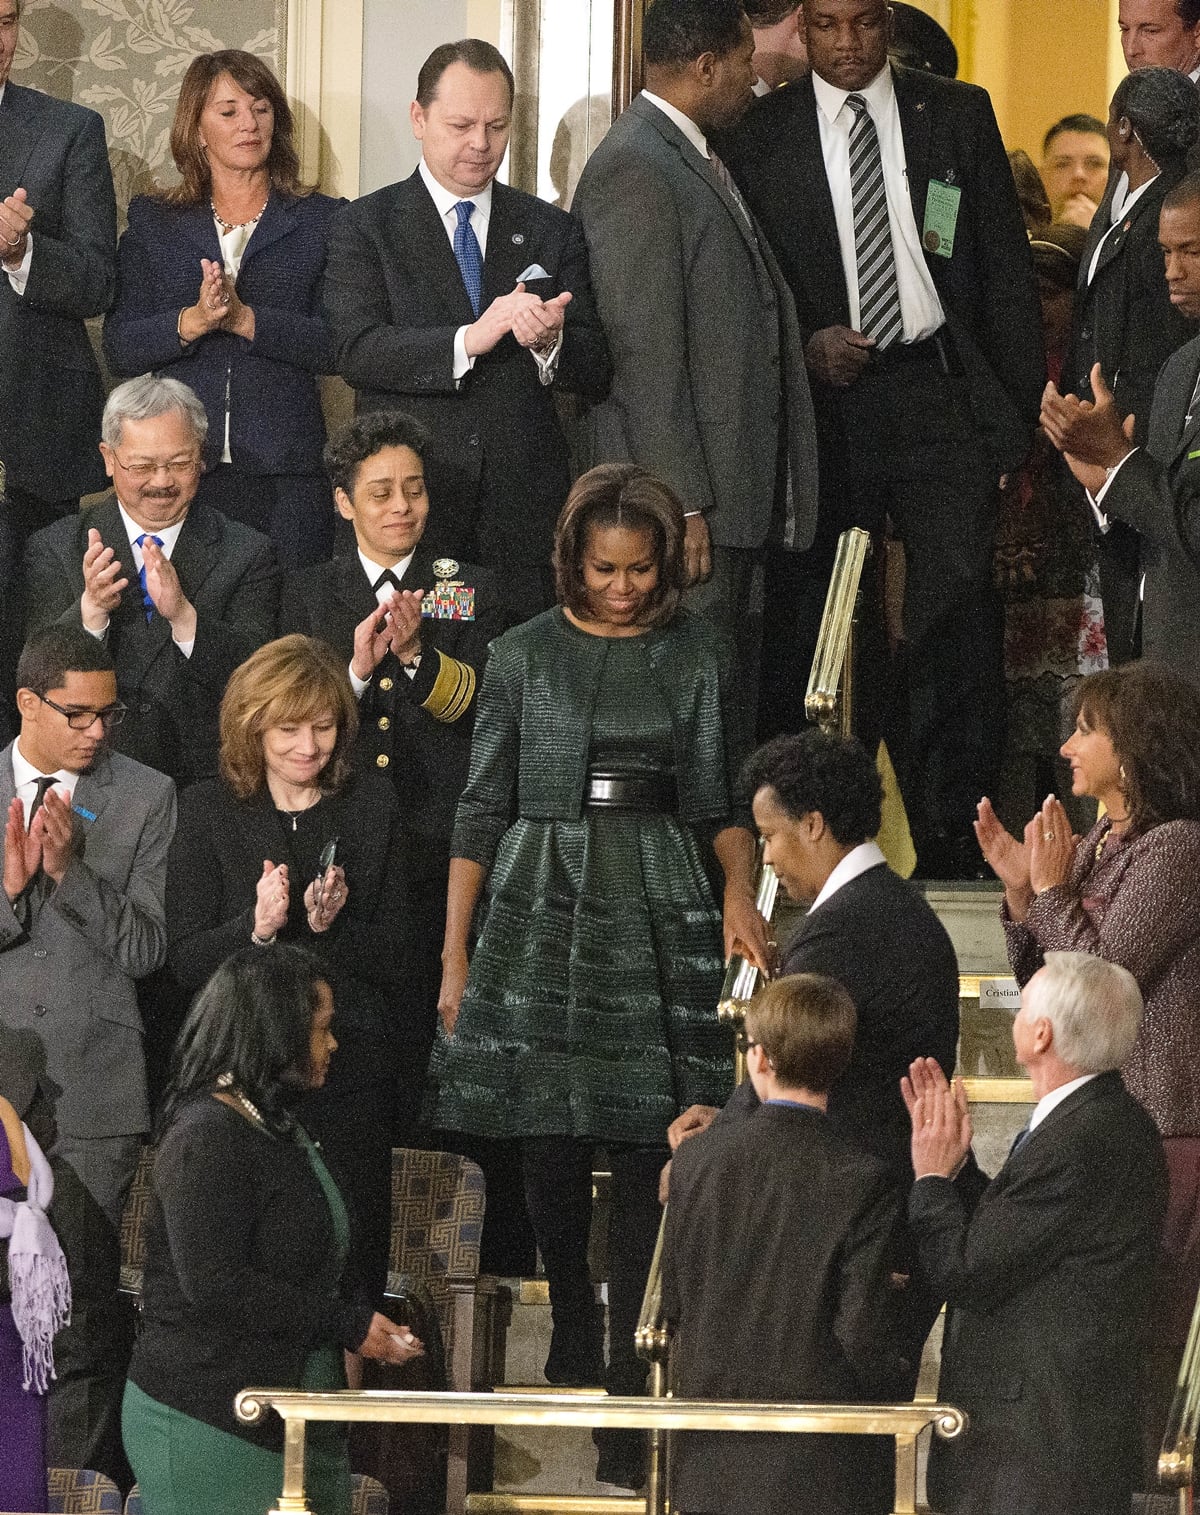 In 2014, Michelle Obama wore a textured, forest green Azzedine Alaia dress with a fitted bodice, A-line skirt, and a wide, black leather belt to the State of the Union address, which received praise for its conservative yet elegant style